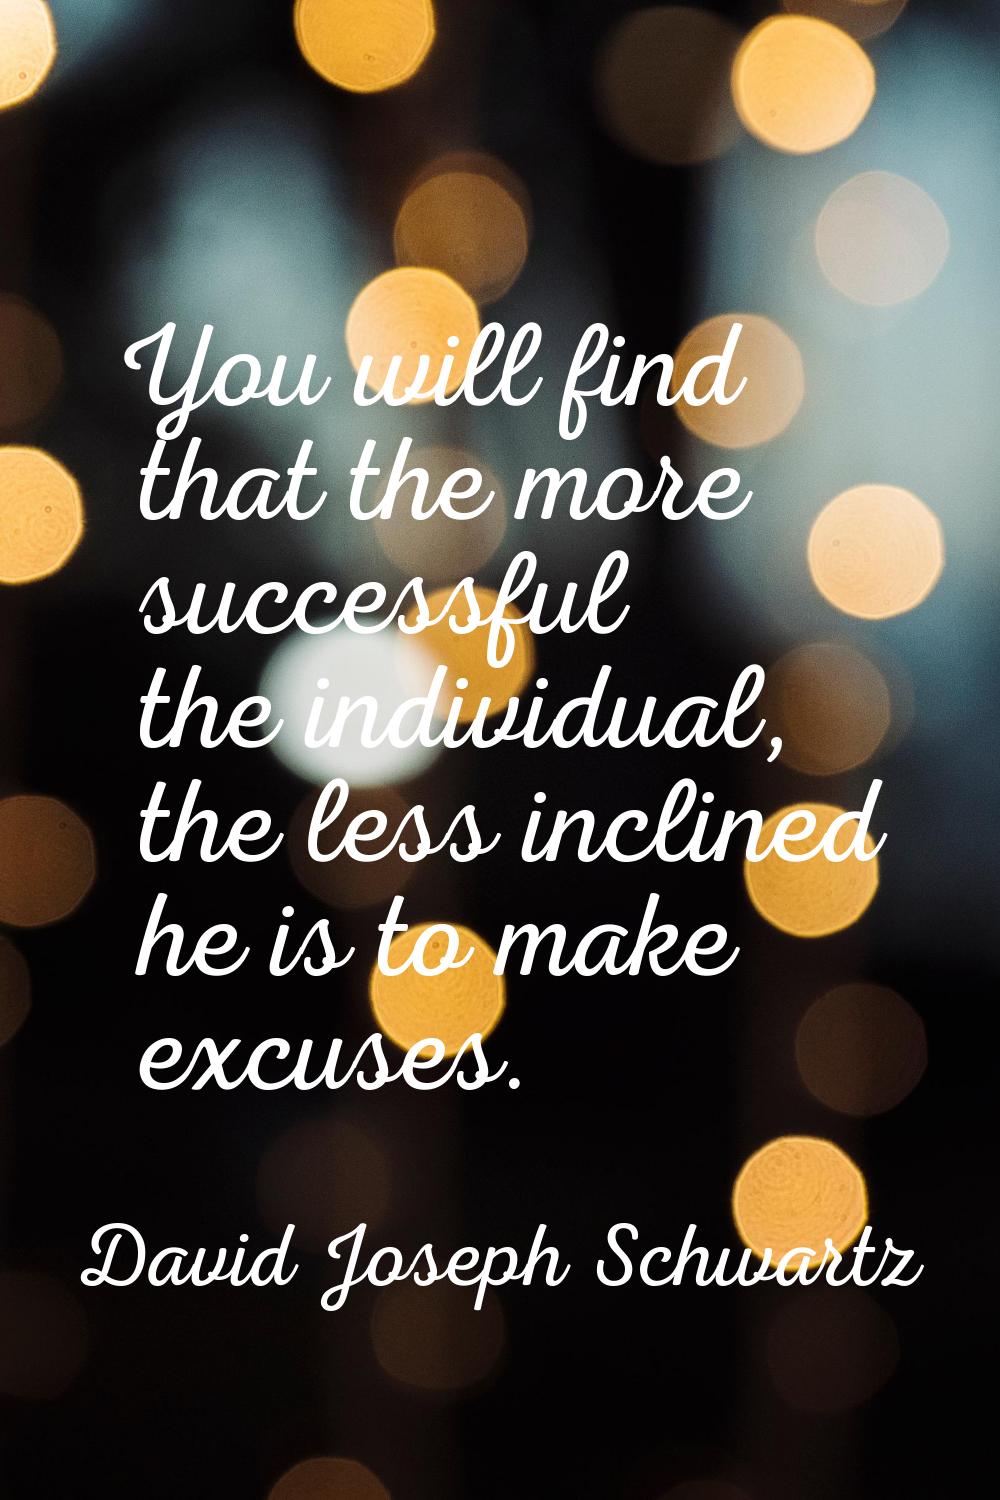 You will find that the more successful the individual, the less inclined he is to make excuses.